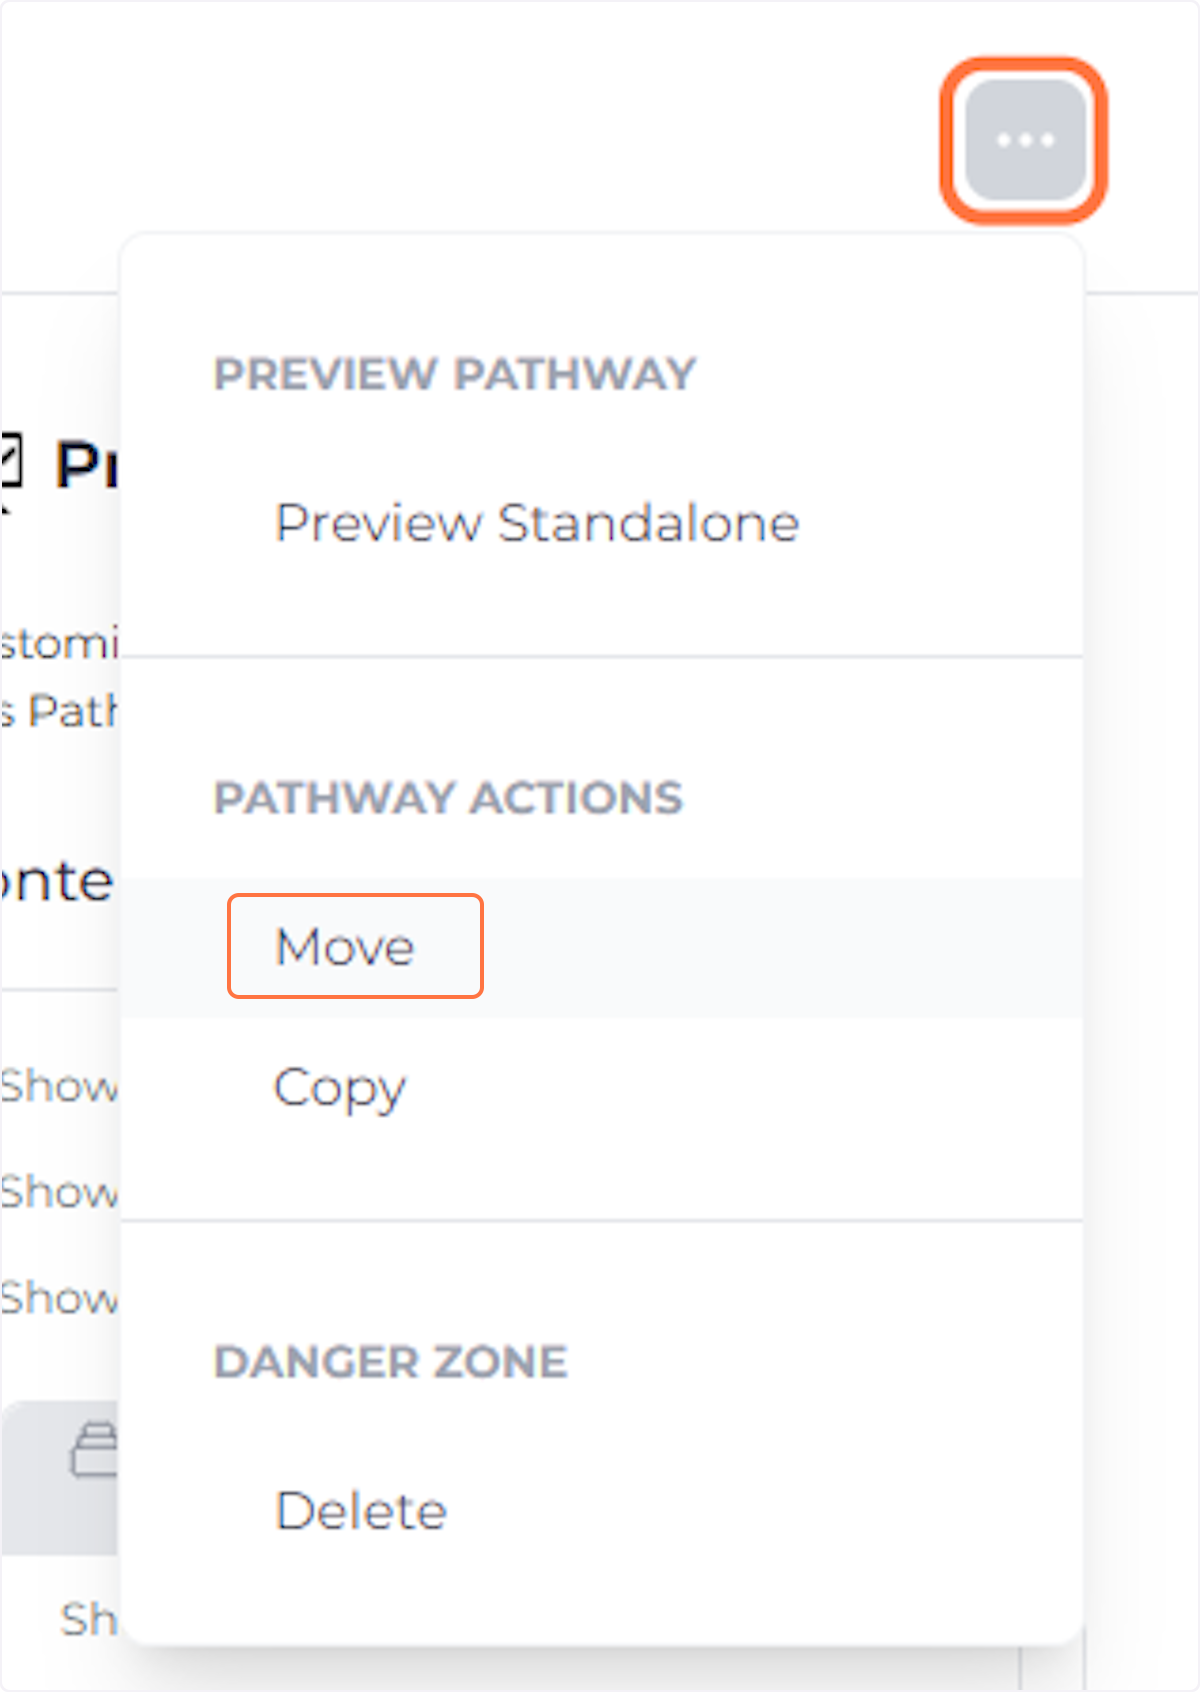 Open the 'Pathway Actions' menu and click 'Move'.